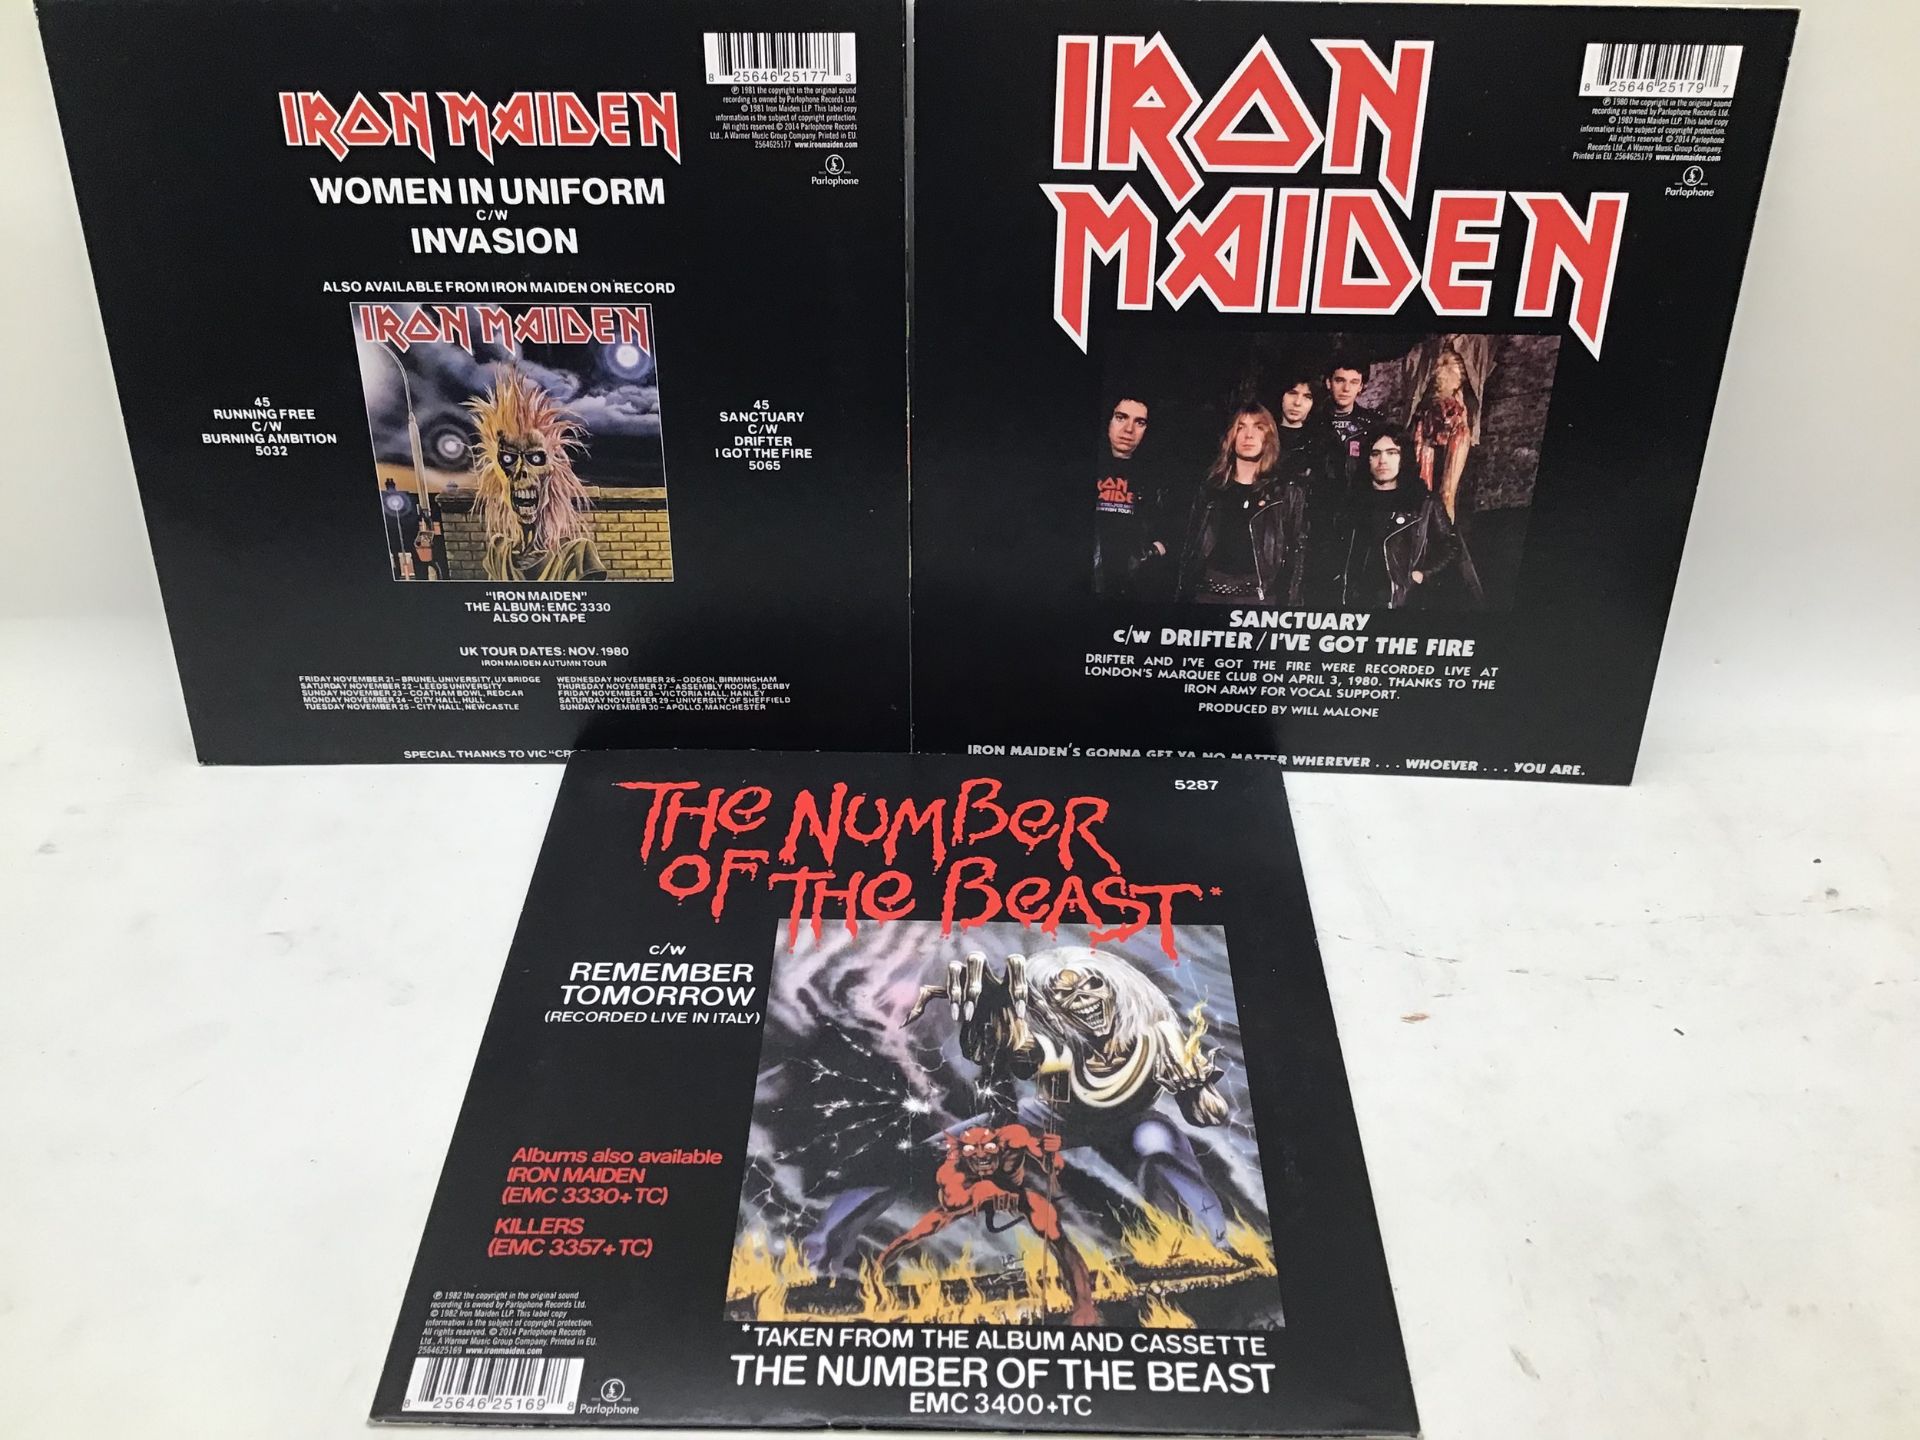 IRON MAIDEN SINGLES X 3. Titles here include - The Number Of the Beast - Women In Uniform and - Image 2 of 2